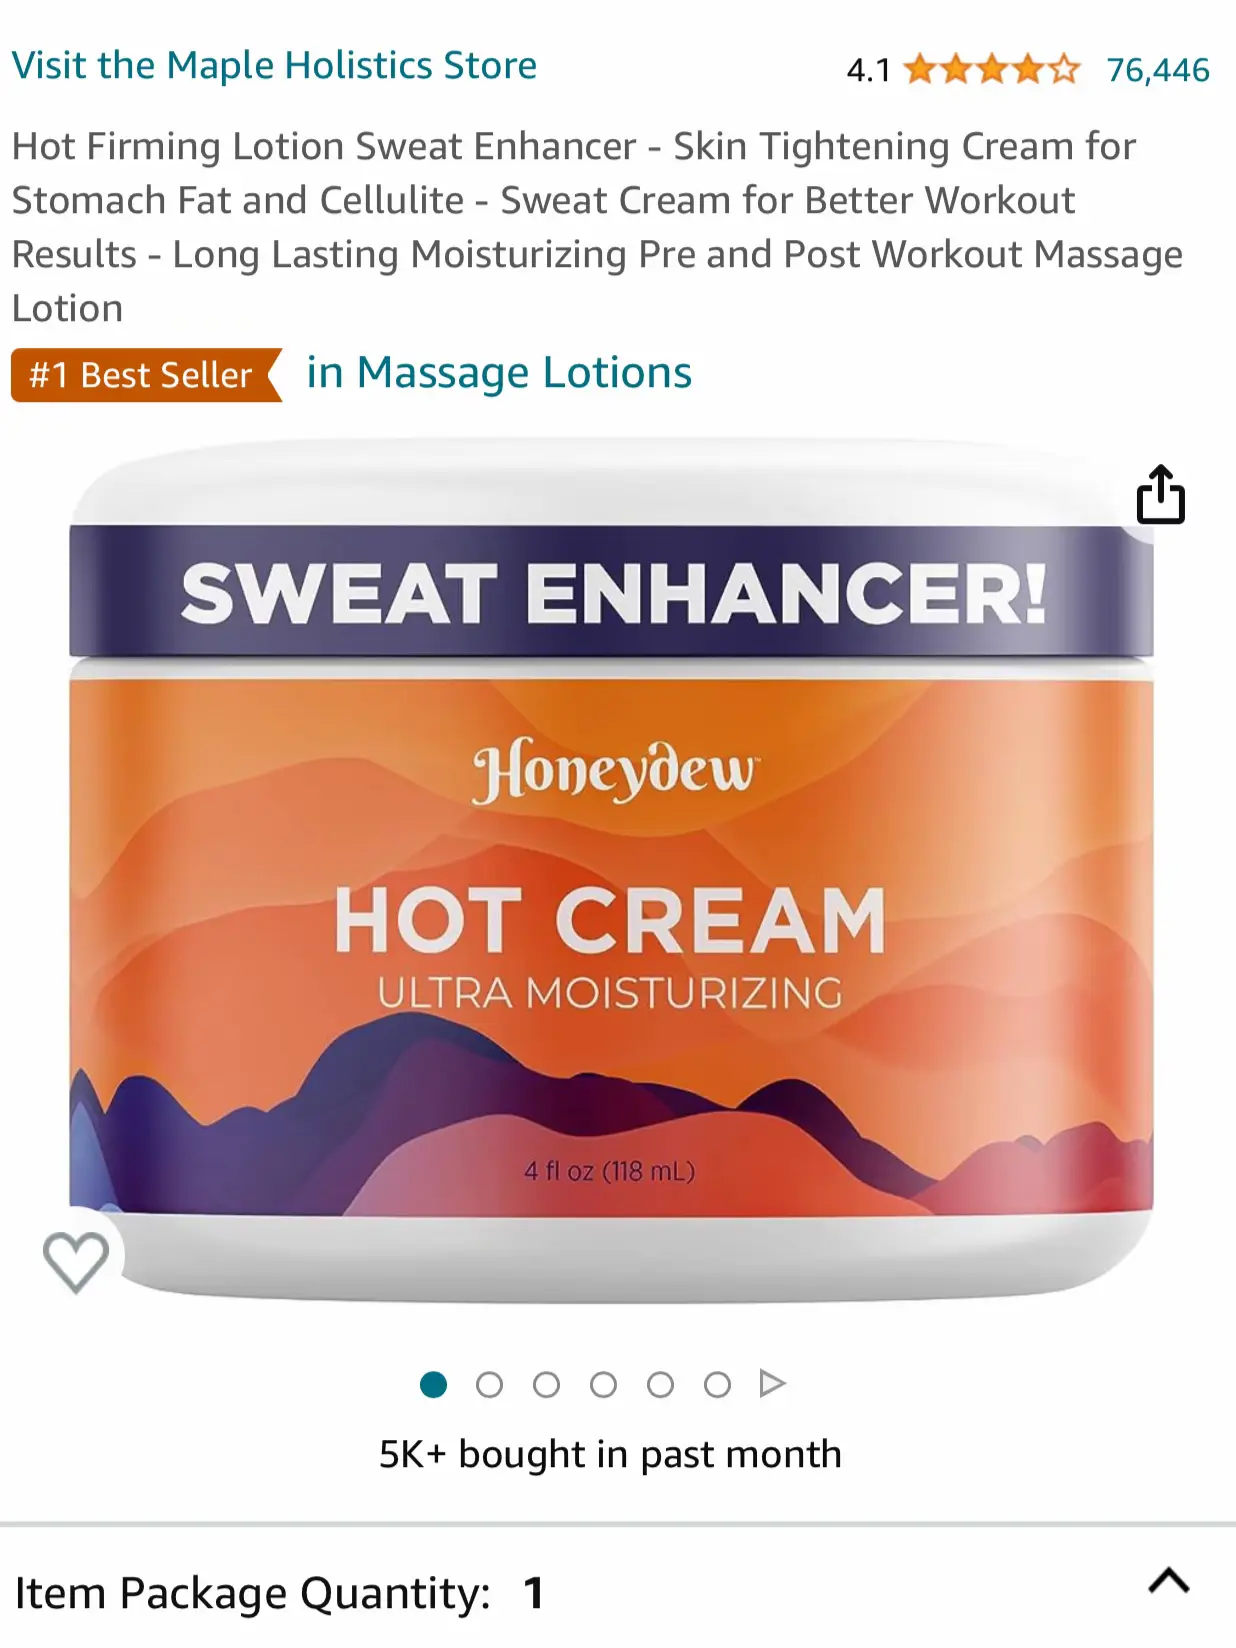 Hot Firming Lotion Sweat Enhancer - Skin Tightening Cream for Stomach Fat  and Cellulite - Sweat Cream for Better Workout Results - Long Lasting